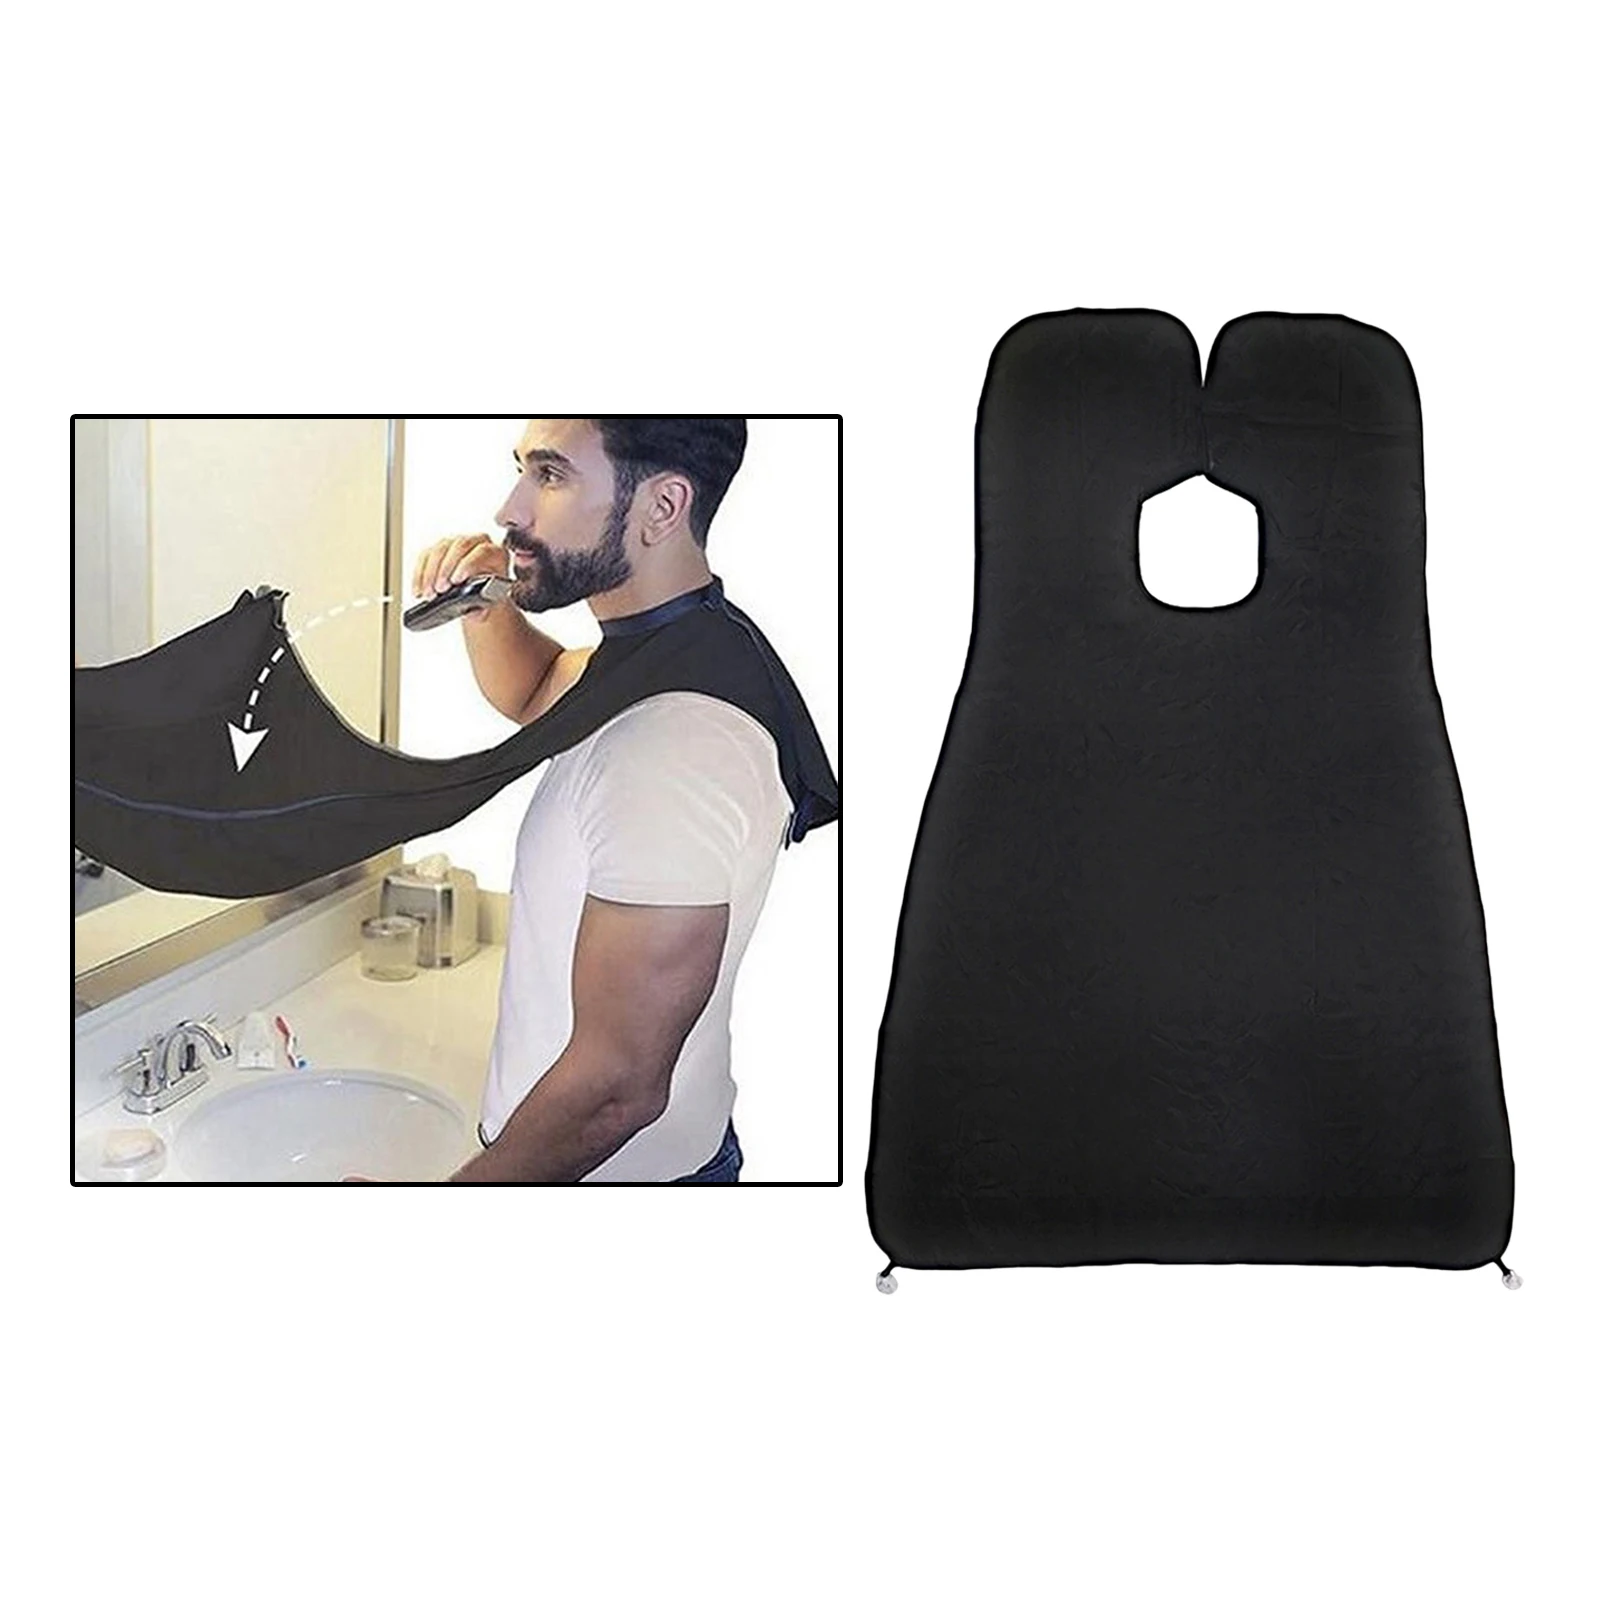 

Beard Shaving Bib The Smart Way to Shave for Men Shaving & Trimming Grooming Cloth Grooming Cape Apron Catcher